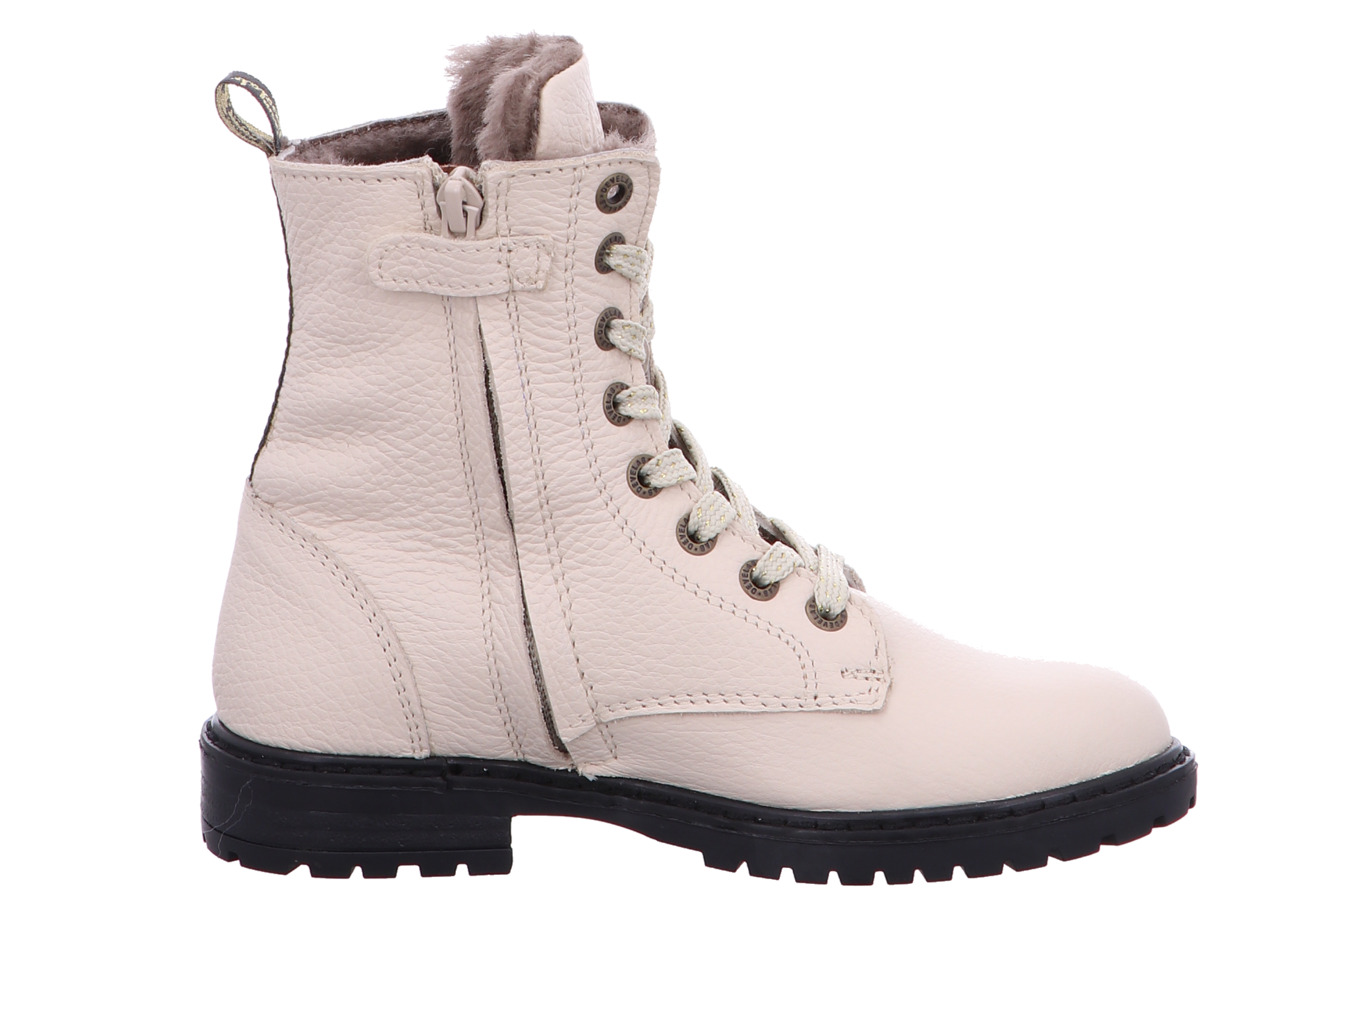 develab_girls_mid_boot_laces_42846_222_4171